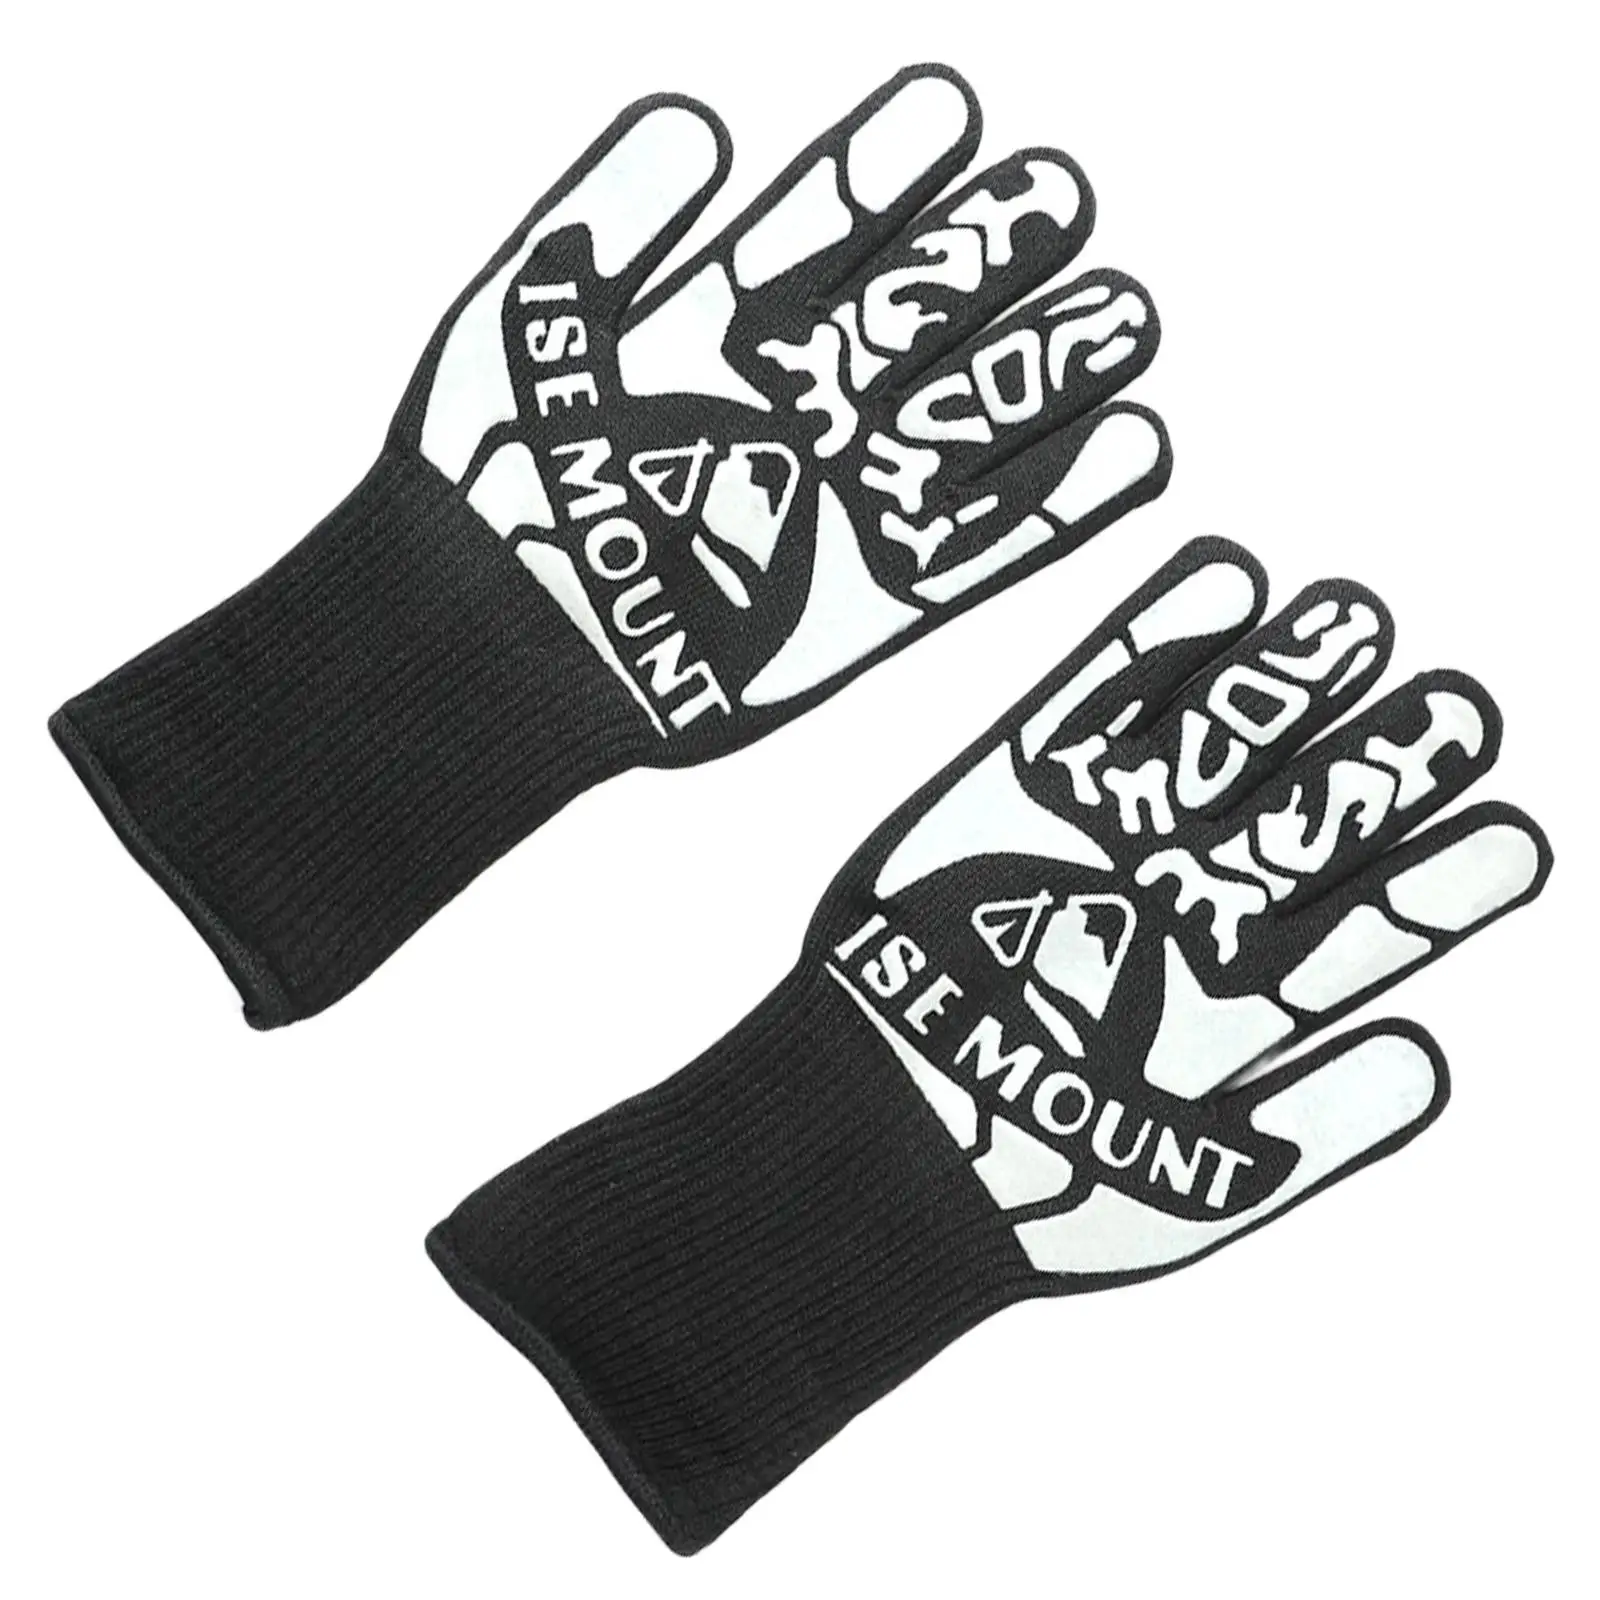 High Temperature 800C Resistant Gloves Non Slip Oven Mitts for Cooking BBQ